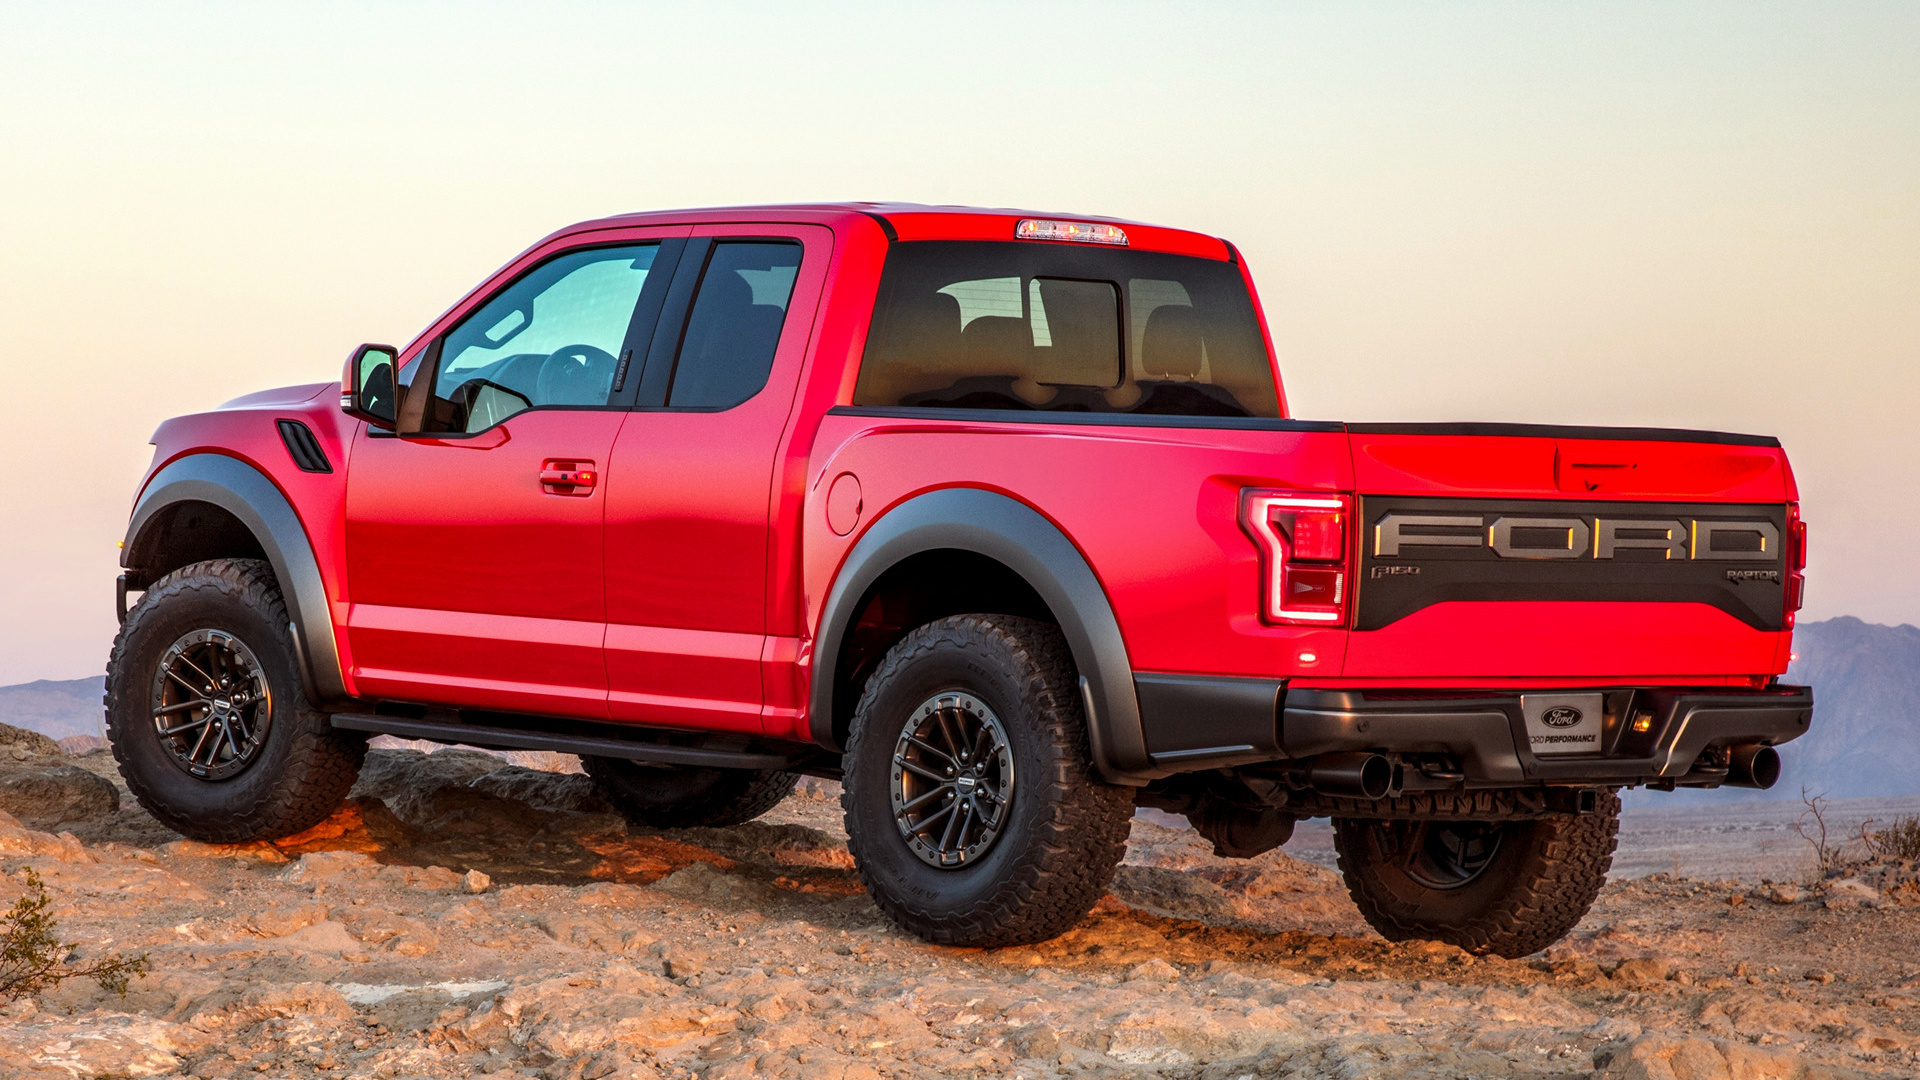 2019 Ford F 150 Raptor Supercab Hd Wallpaper Background Image 1920x1080